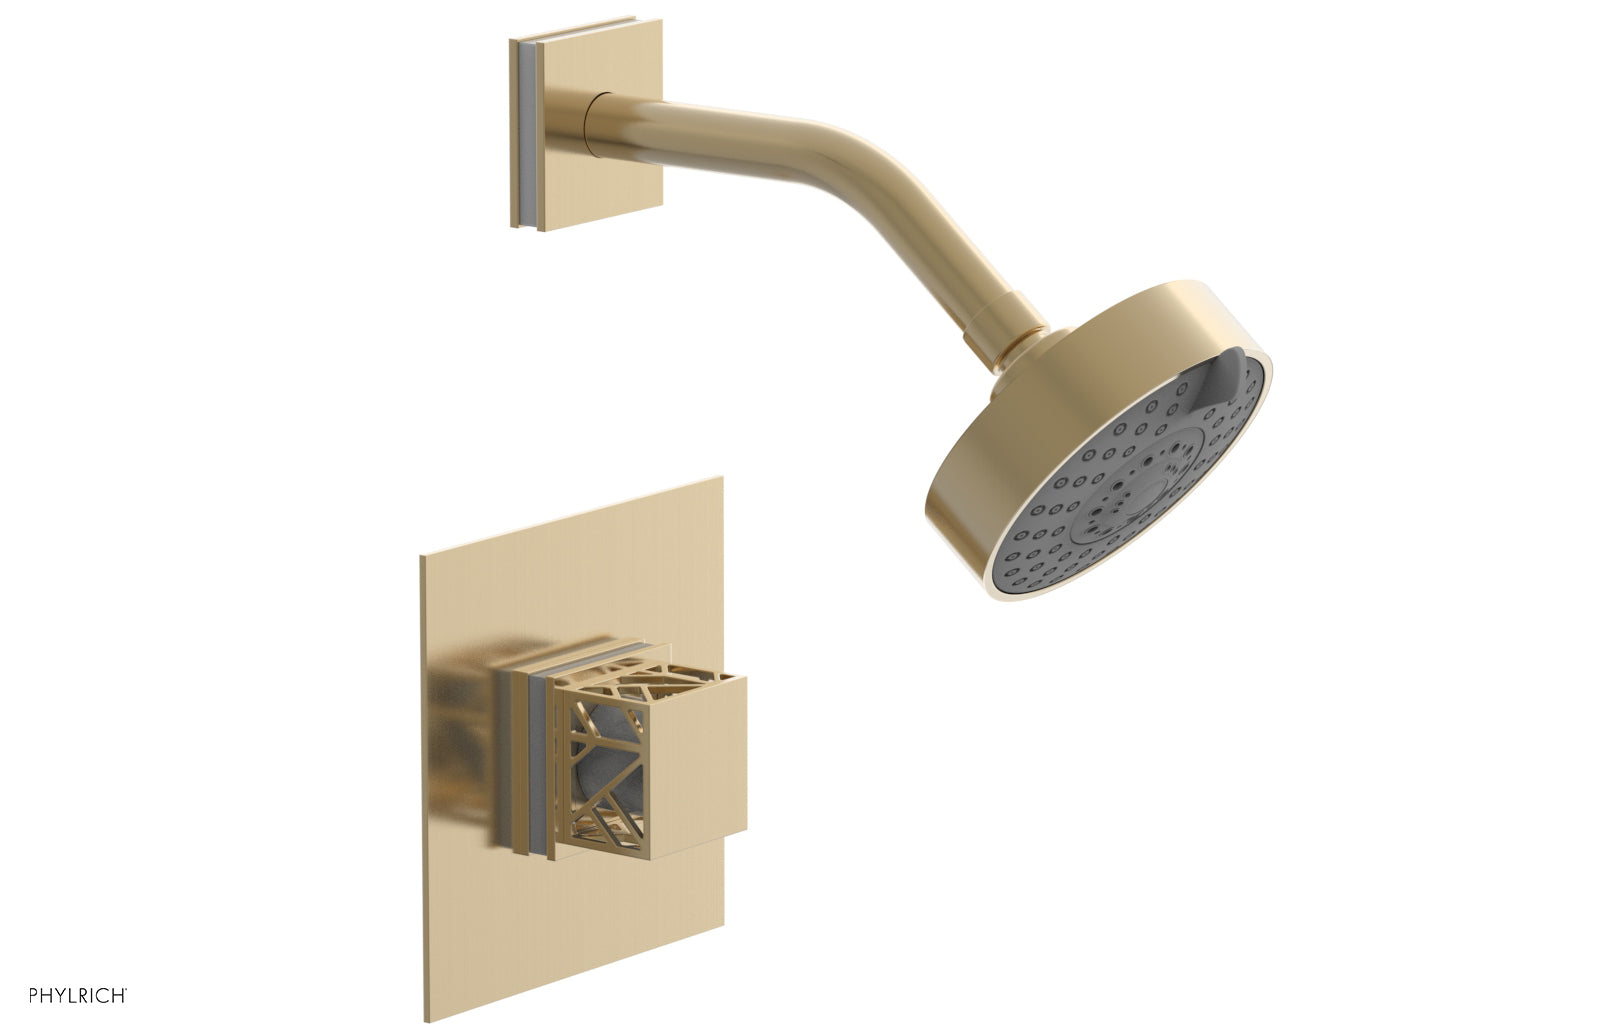 Phylrich JOLIE Pressure Balance Shower Set - Square Handle with "White" Accents